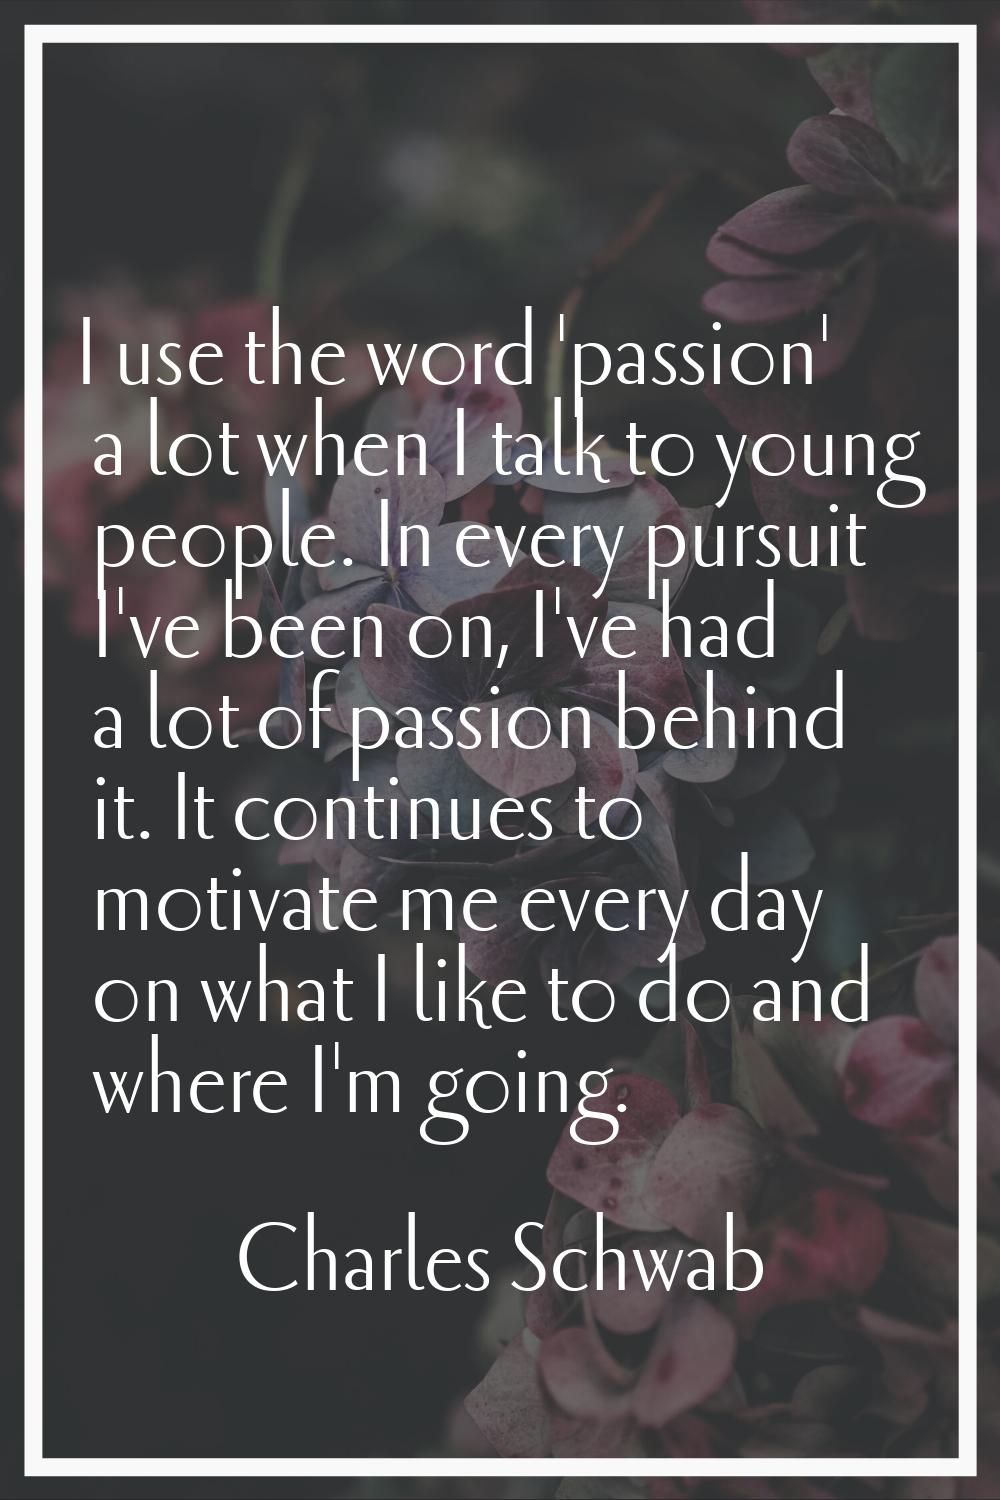 I use the word 'passion' a lot when I talk to young people. In every pursuit I've been on, I've had